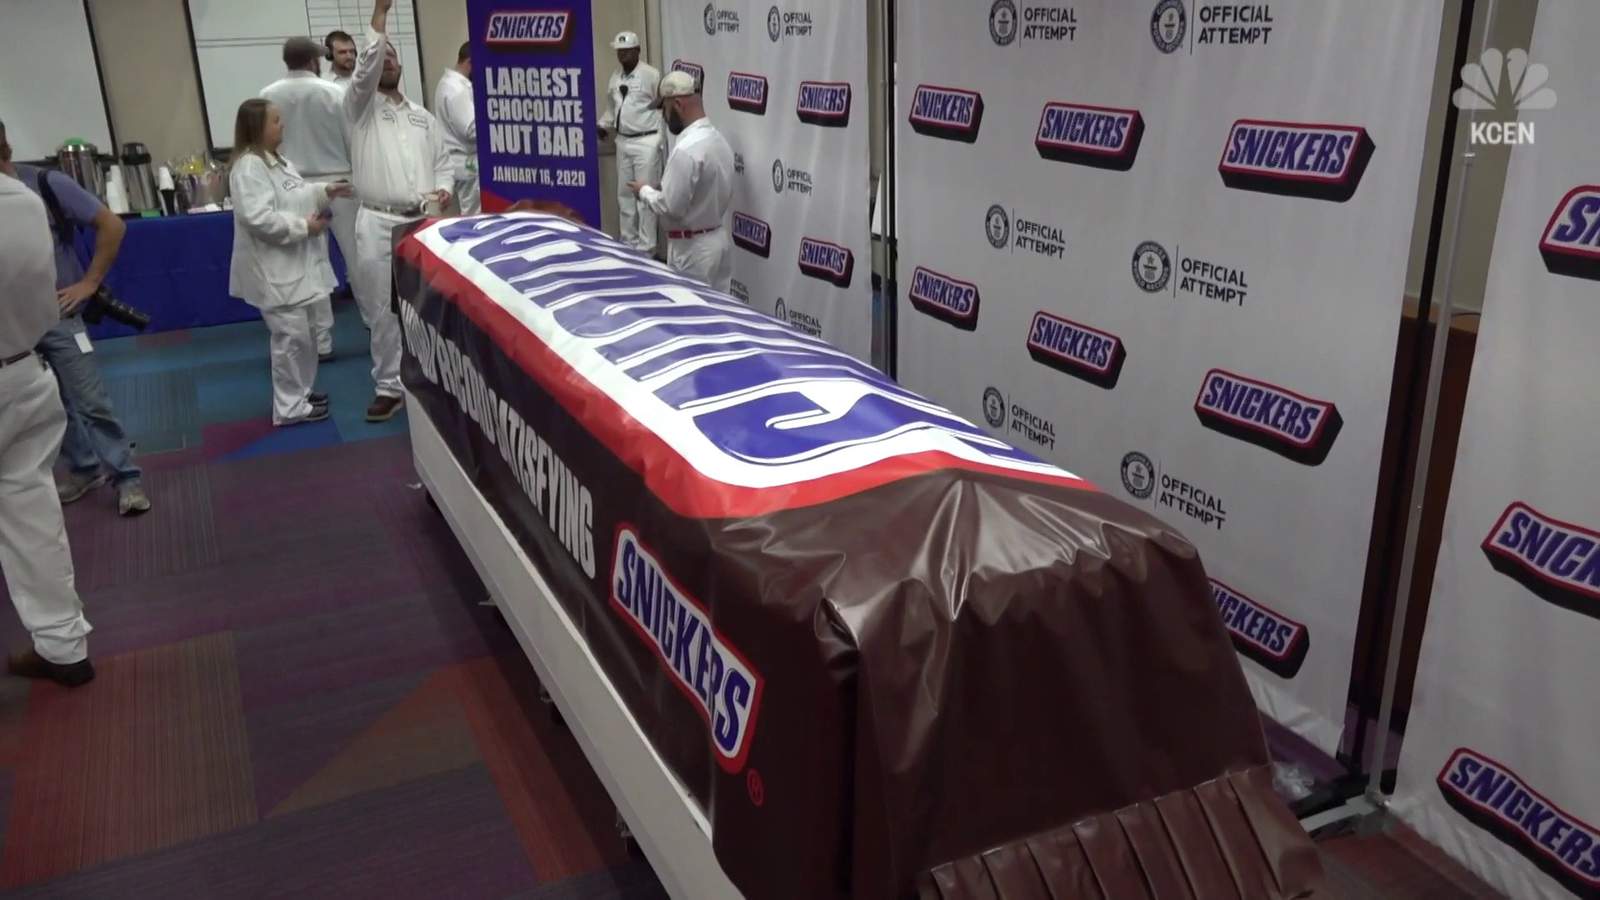 World’s largest Snickers bar unveiled in Texas